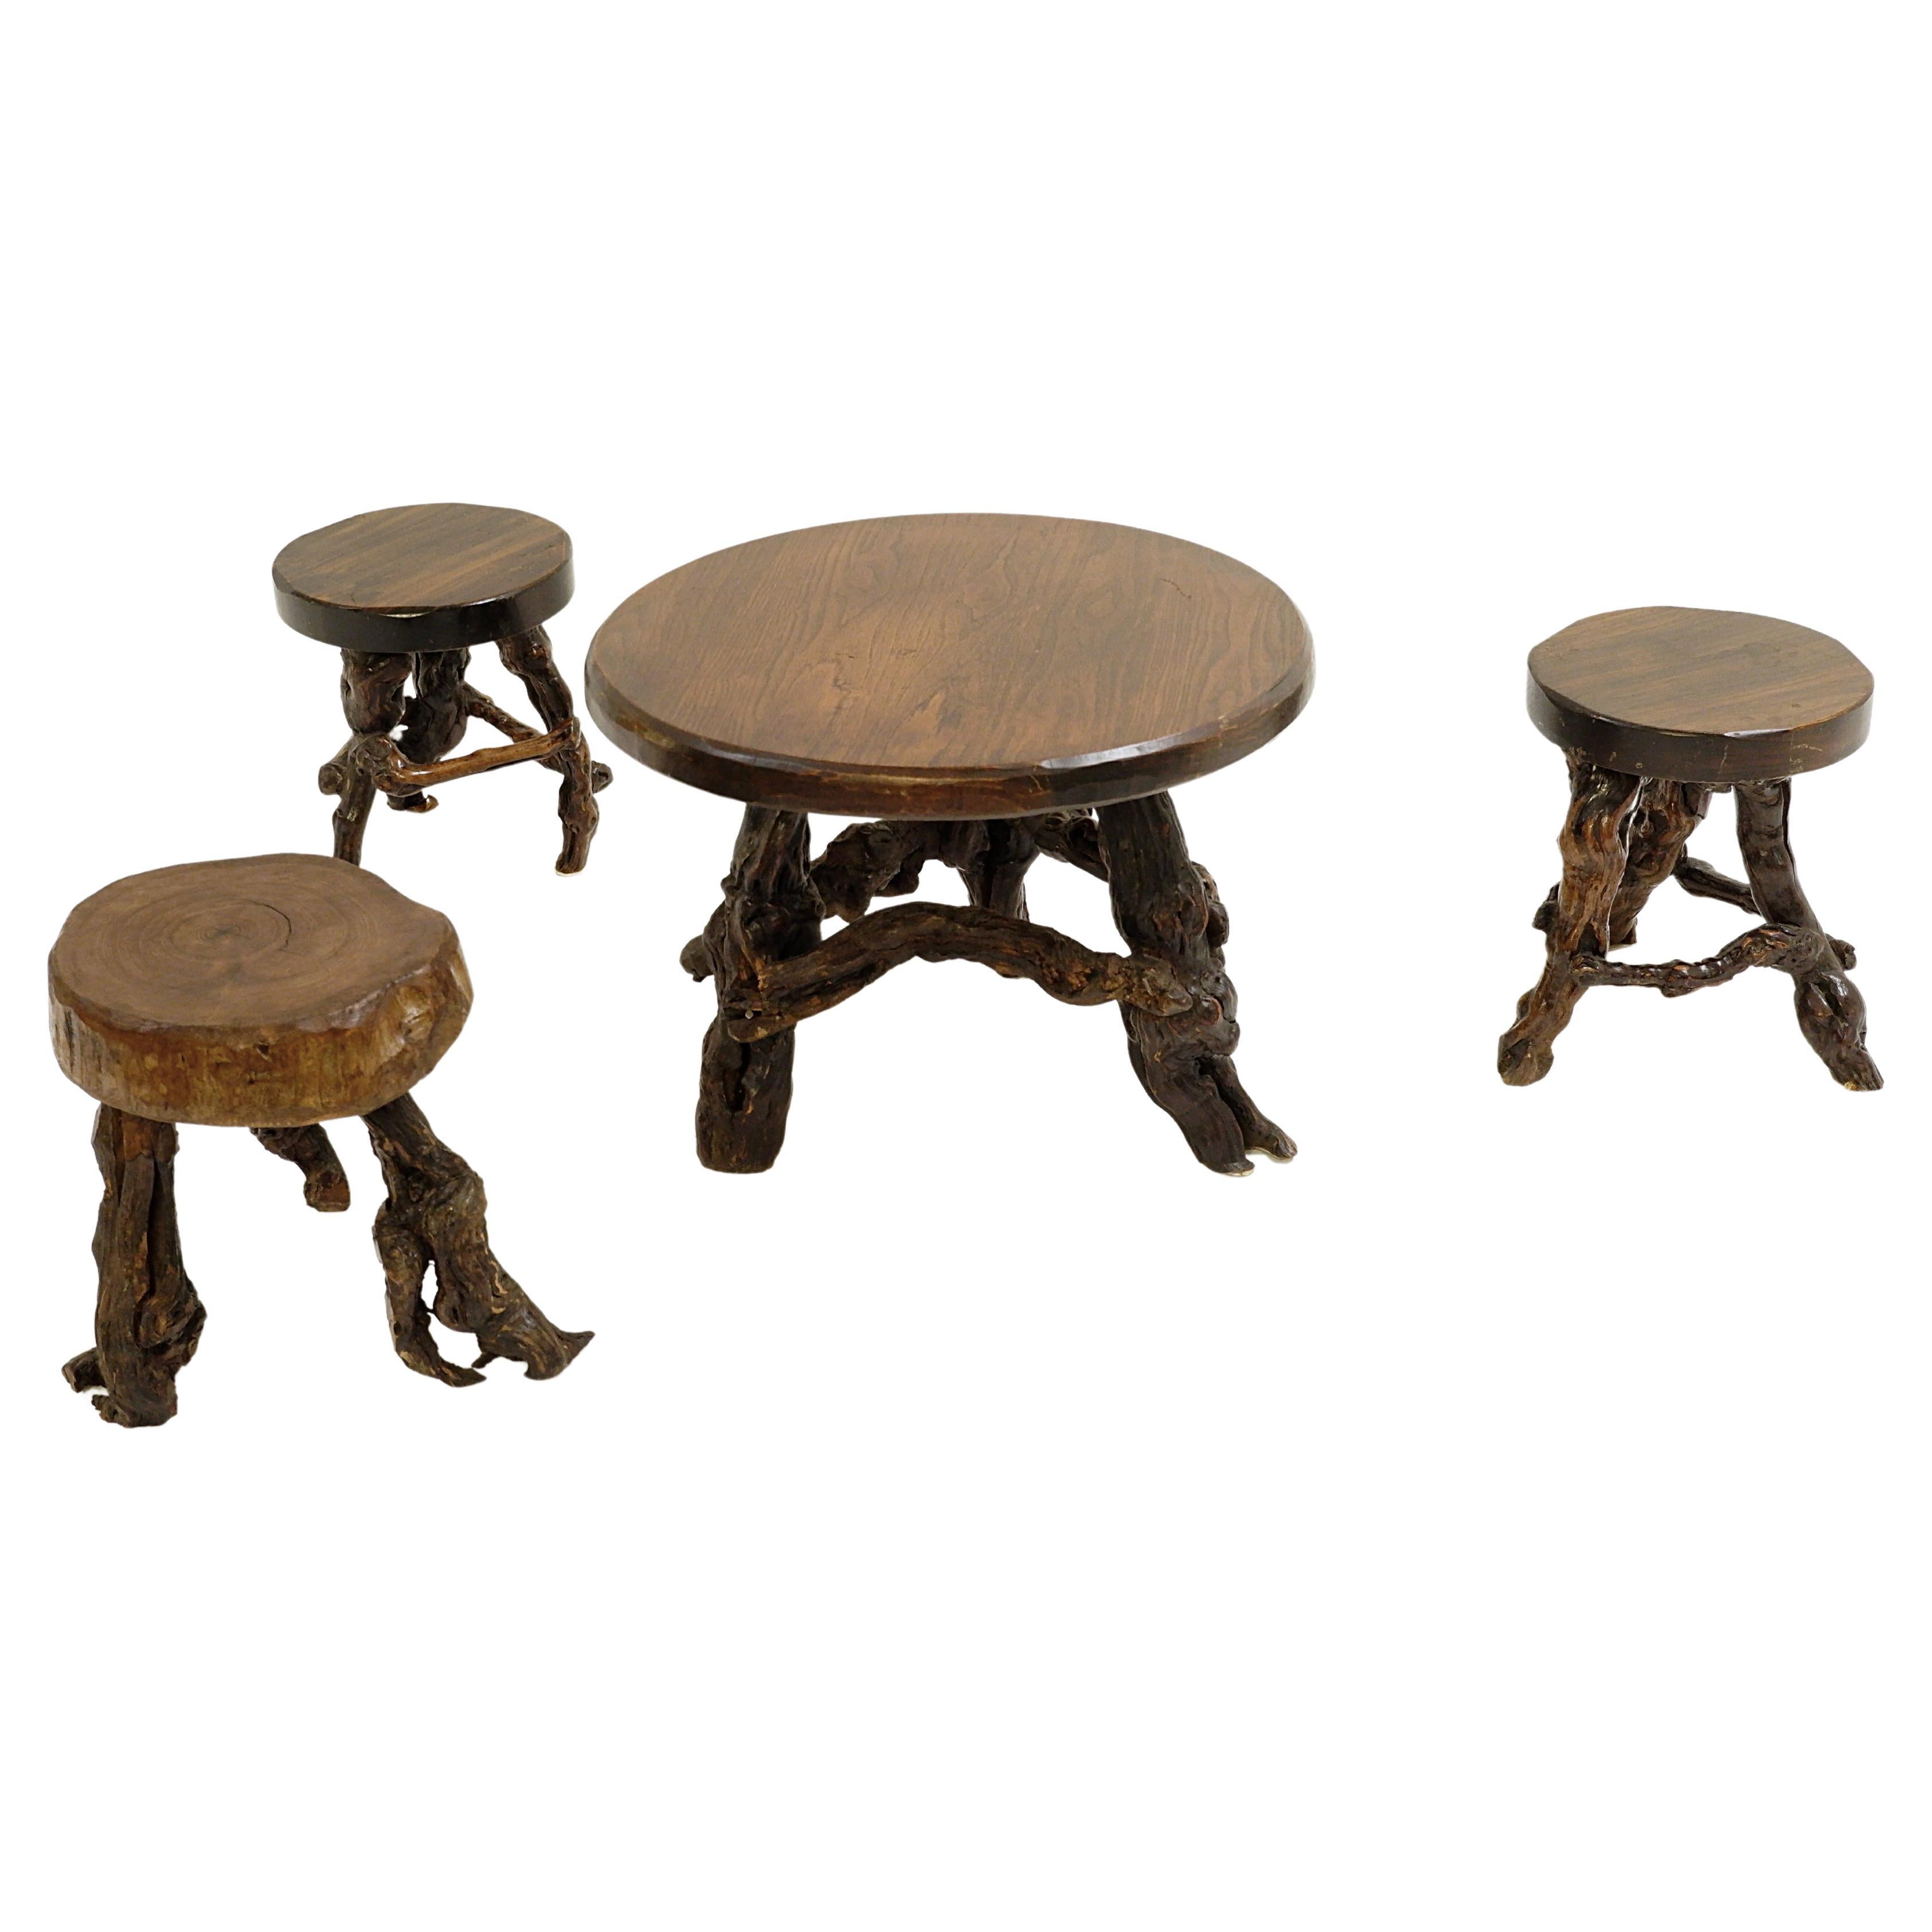 Primitive Set Tabls/Stools with Round Slab Seat and Legs Constructed from Vines For Sale